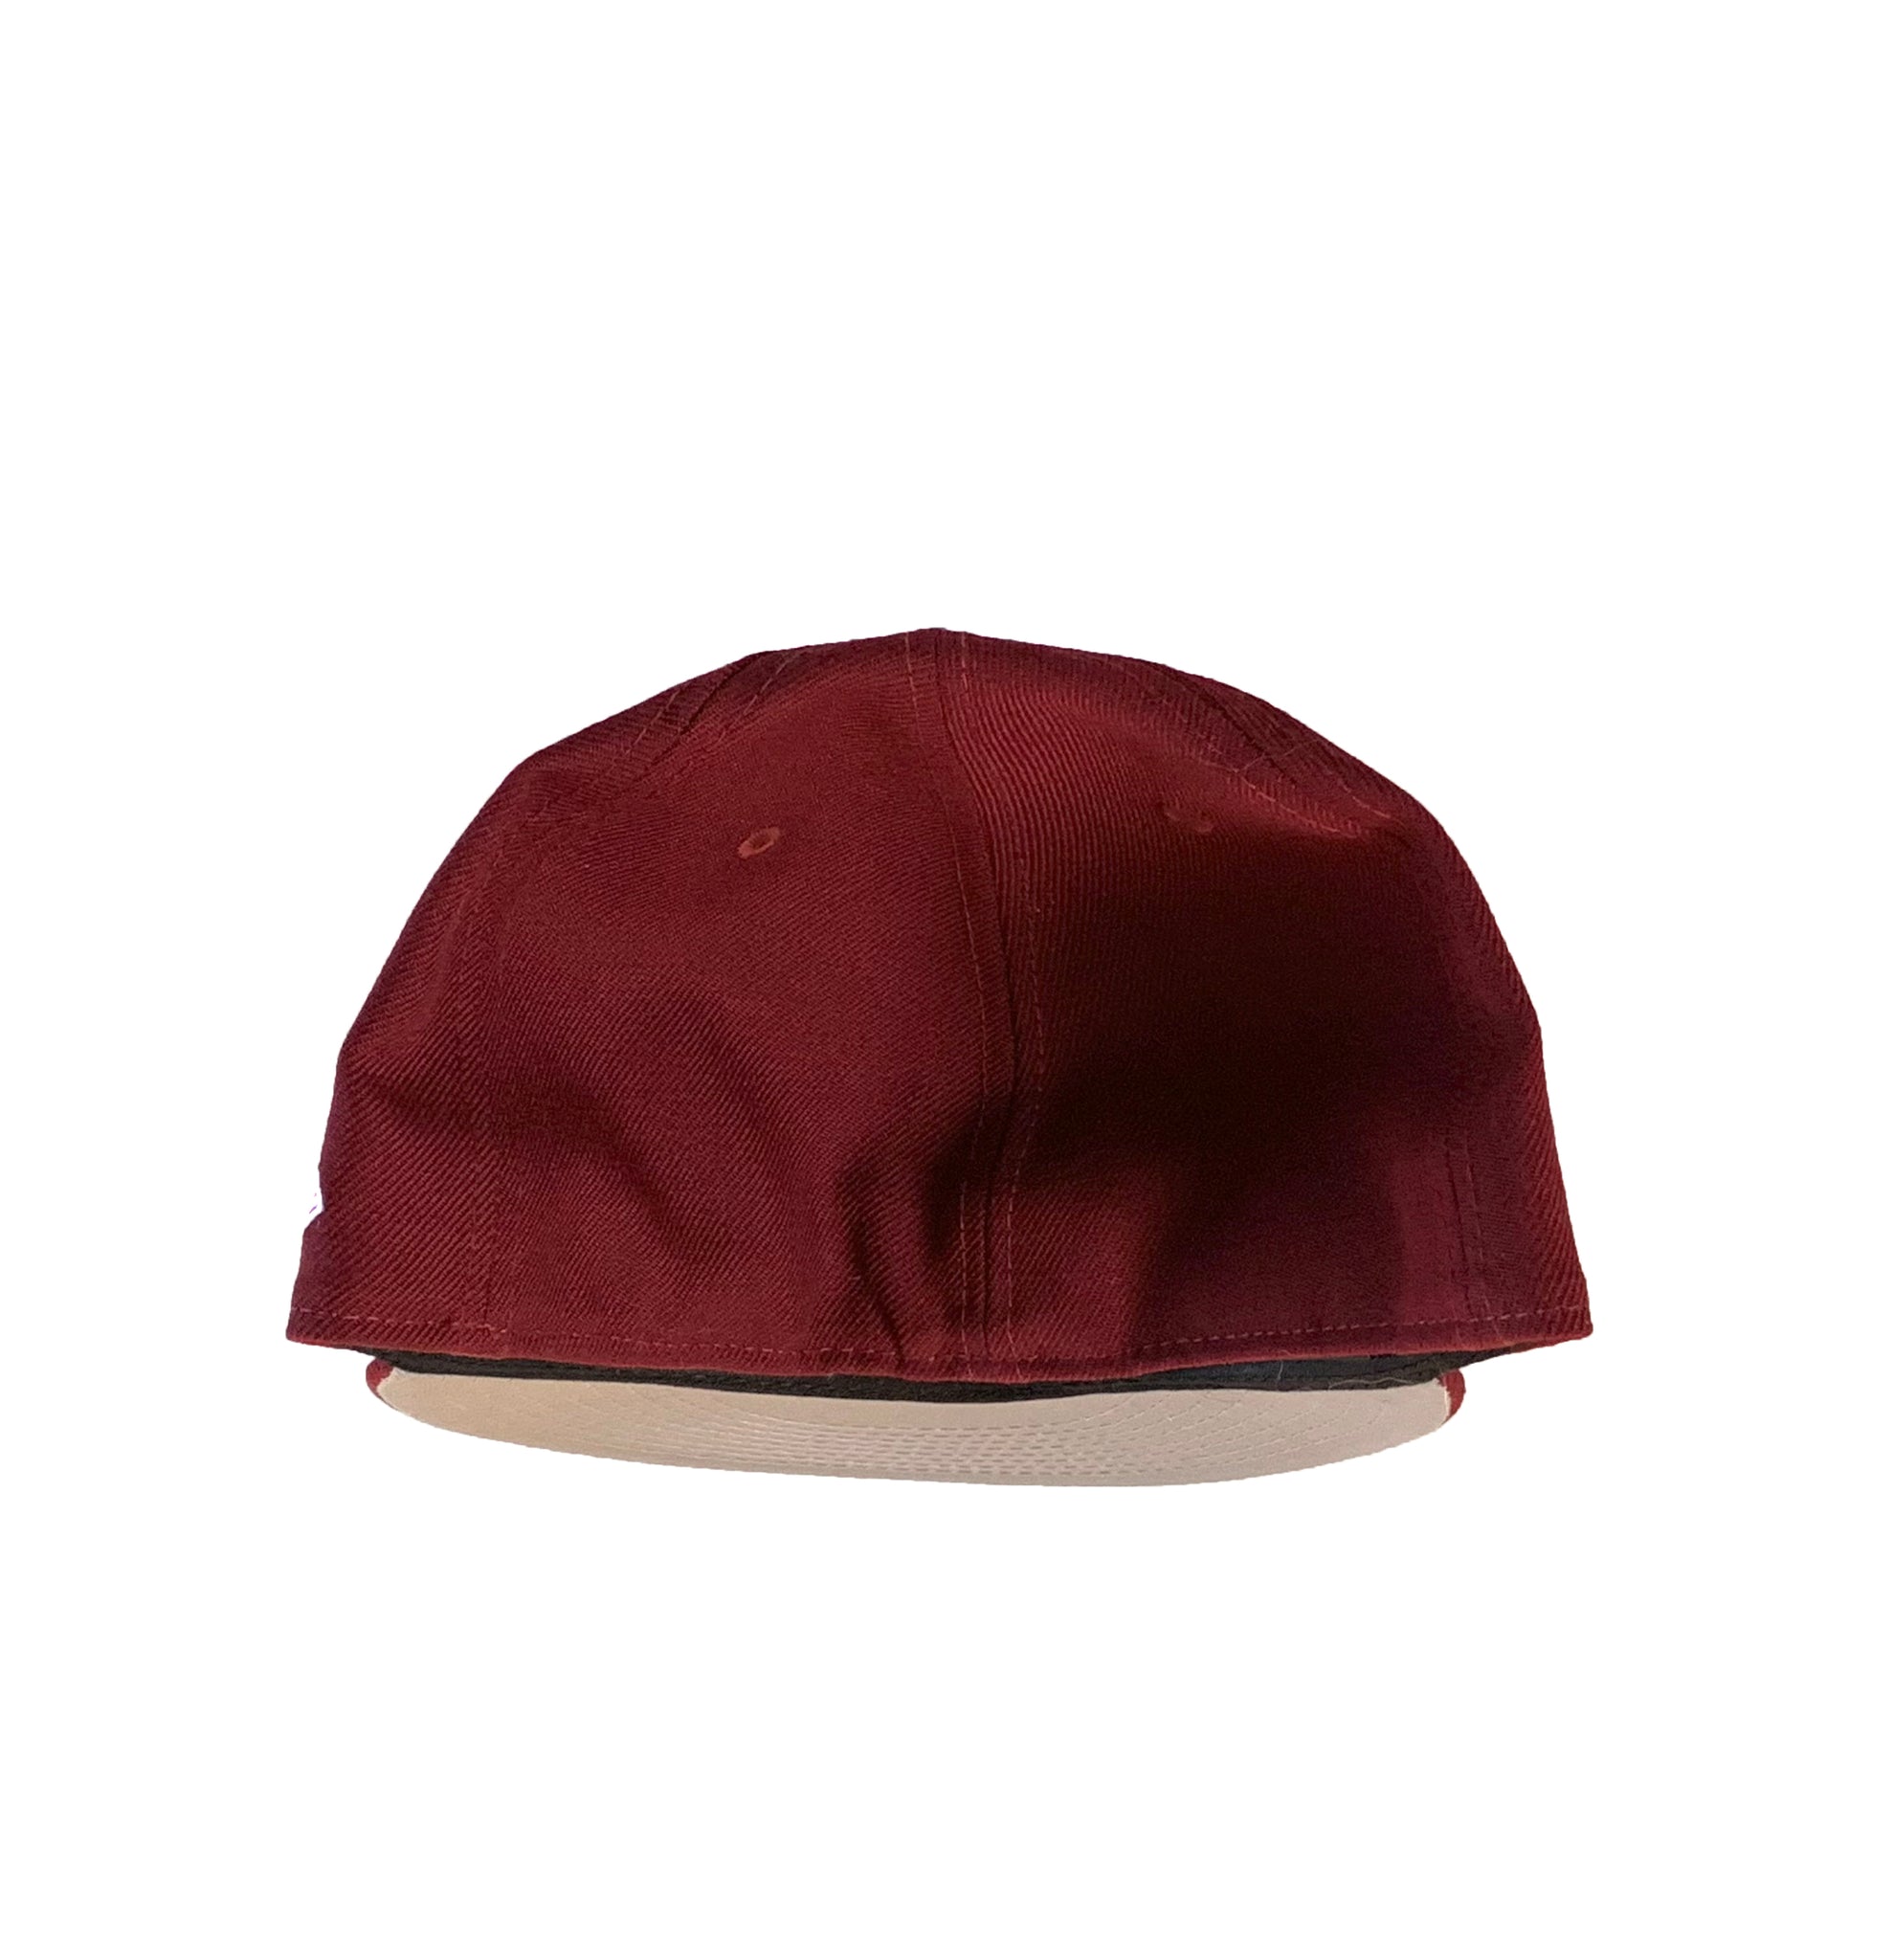 Q&C  x New Era 59Fifty Fitted Hat (Maroon)